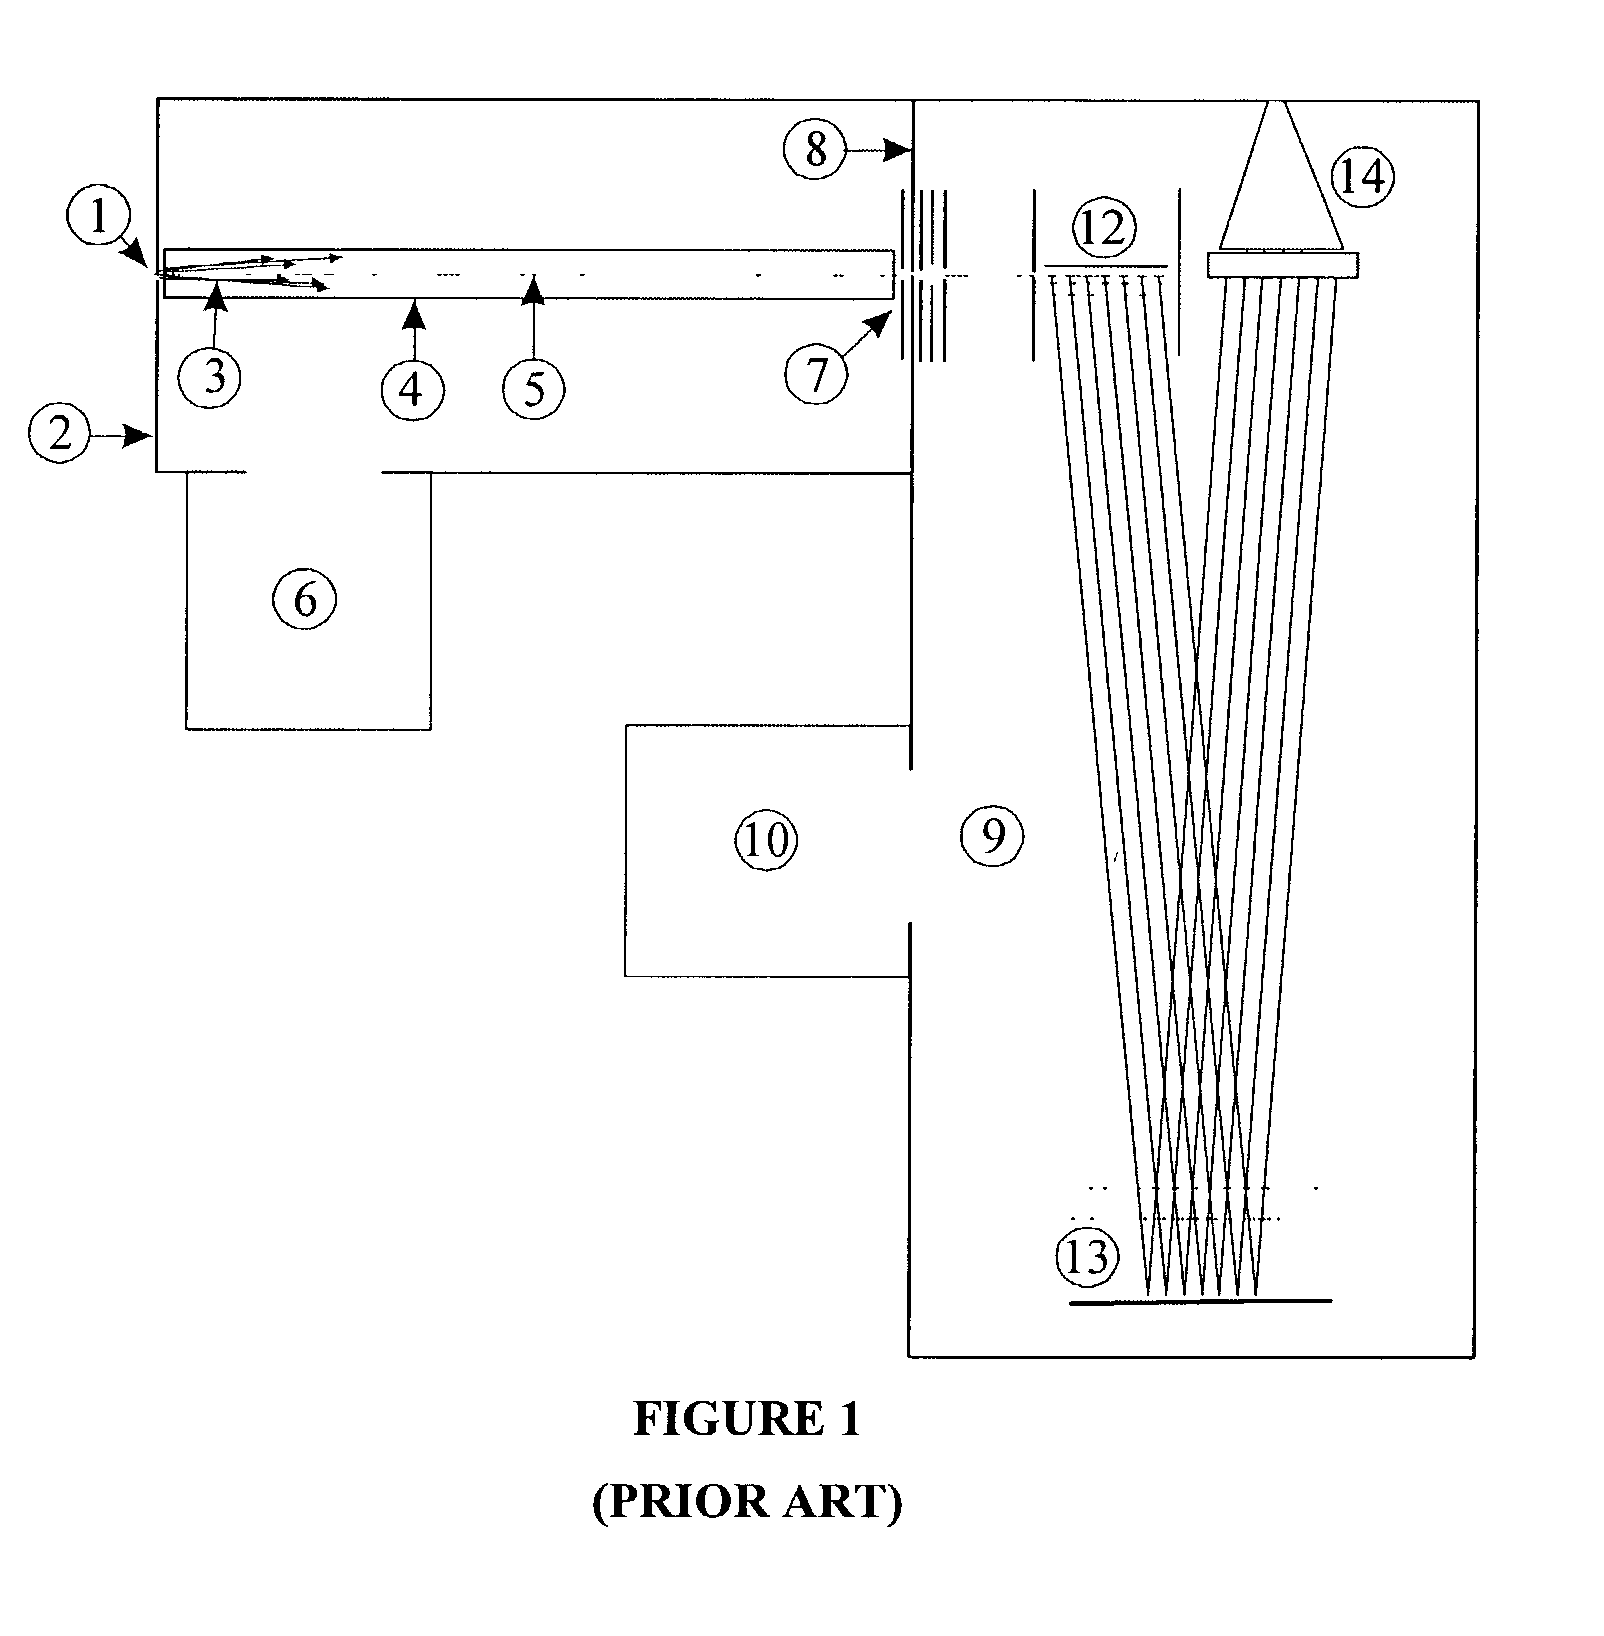 Time-of-flight mass spectrometers with orthogonal ion injection